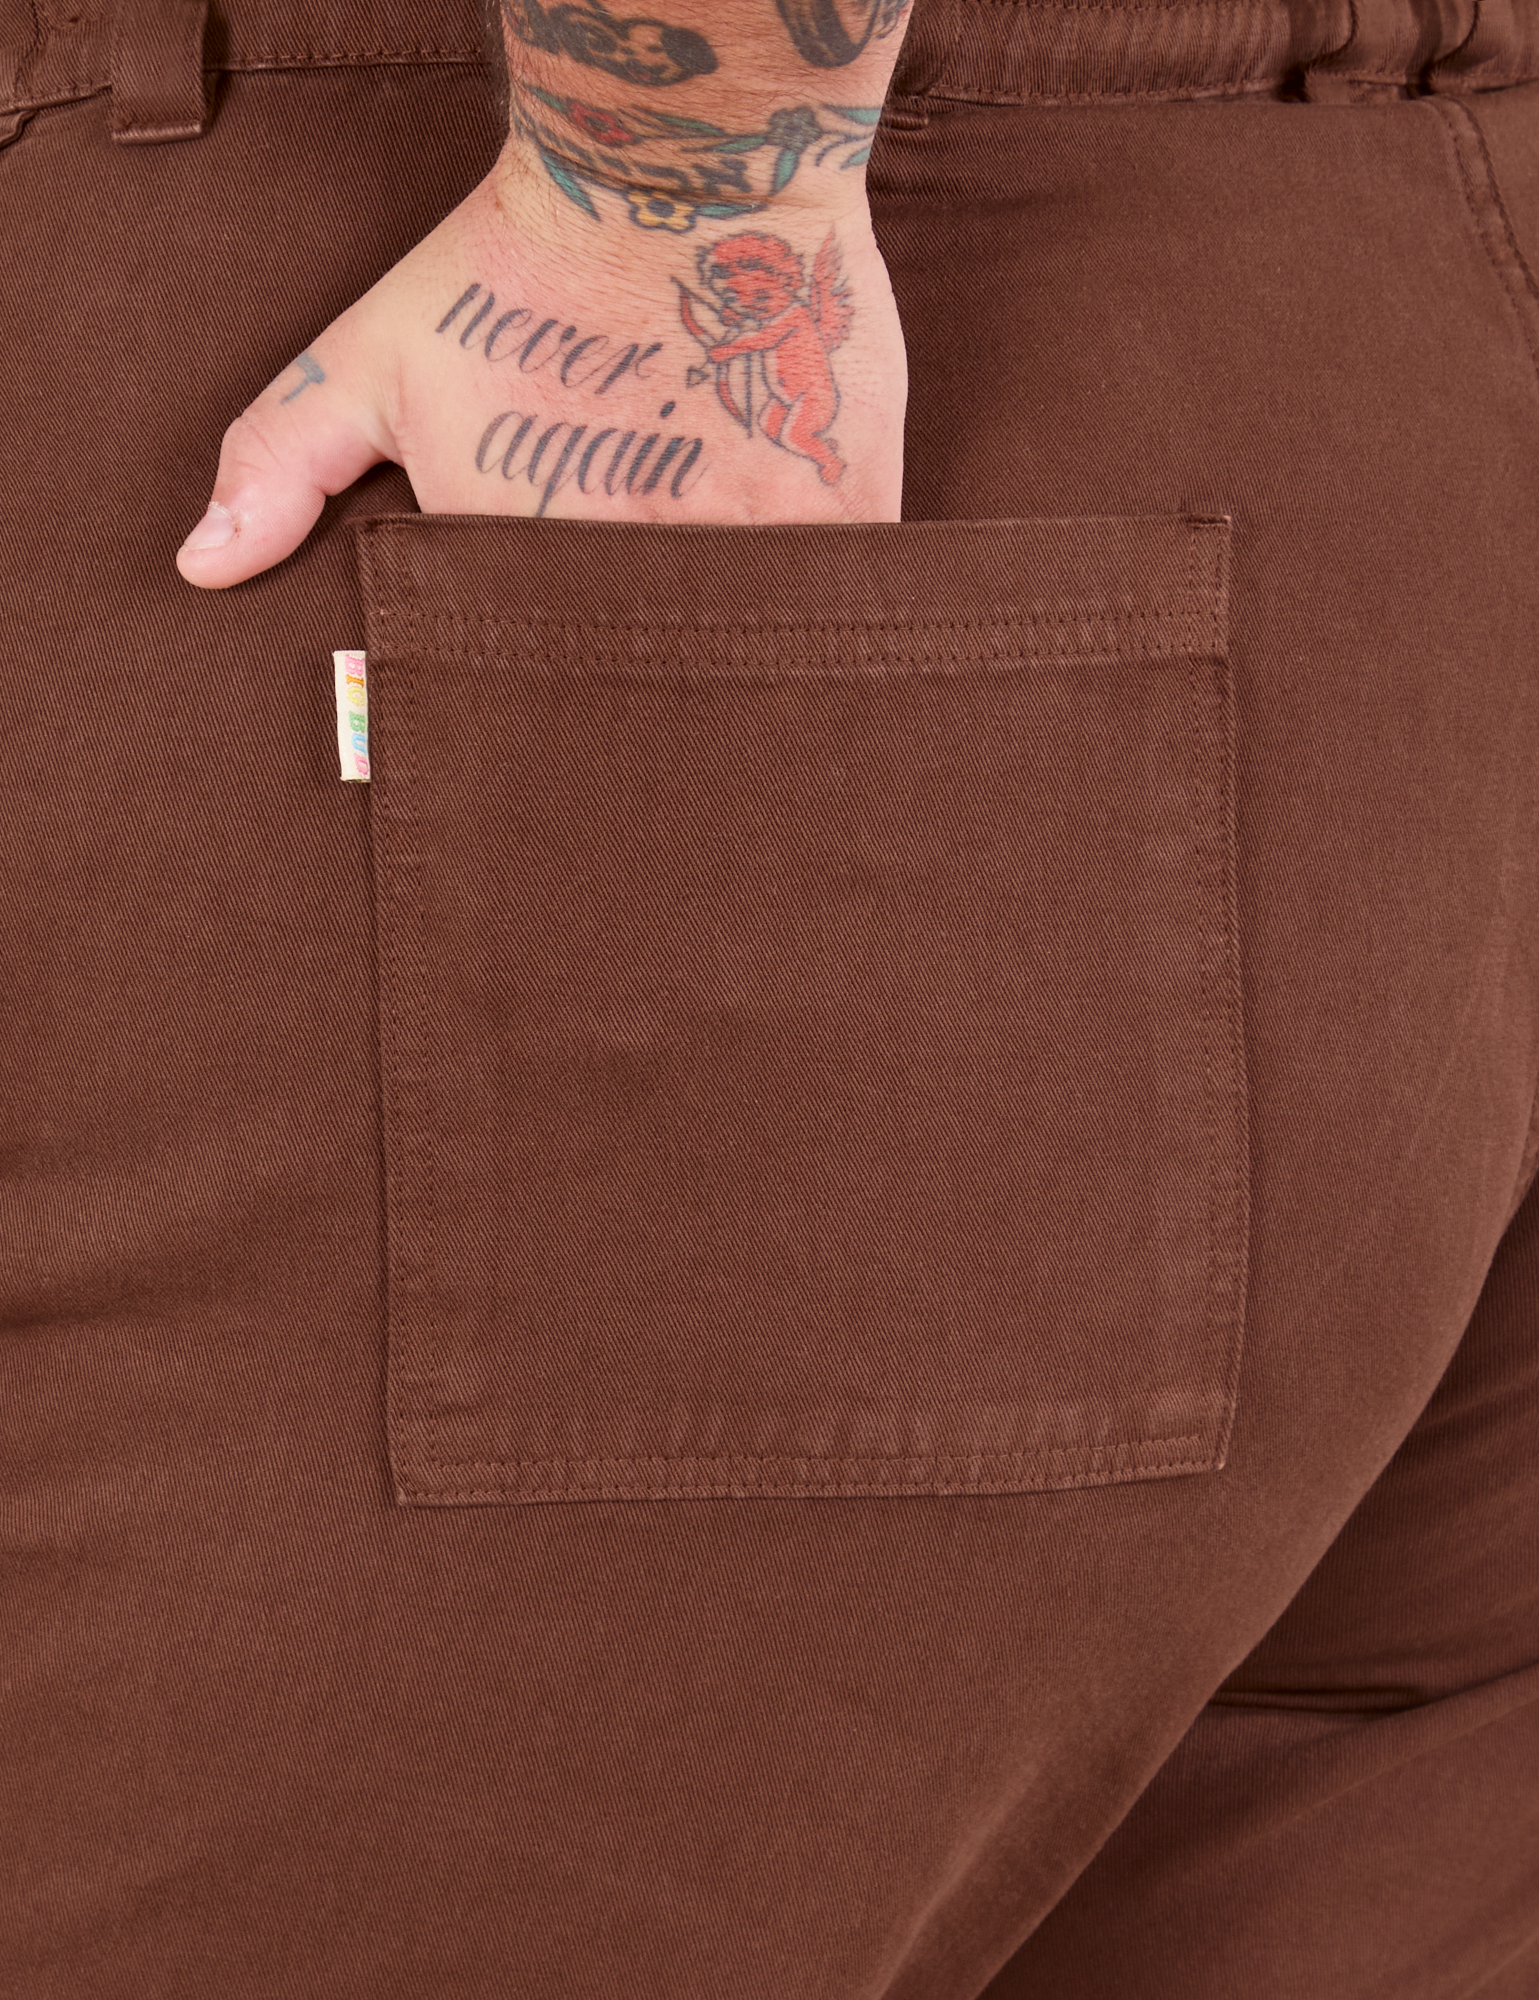 Bell Bottoms in Fudgesicle Brown back pocket close up. Sam has their hand in the pocket.